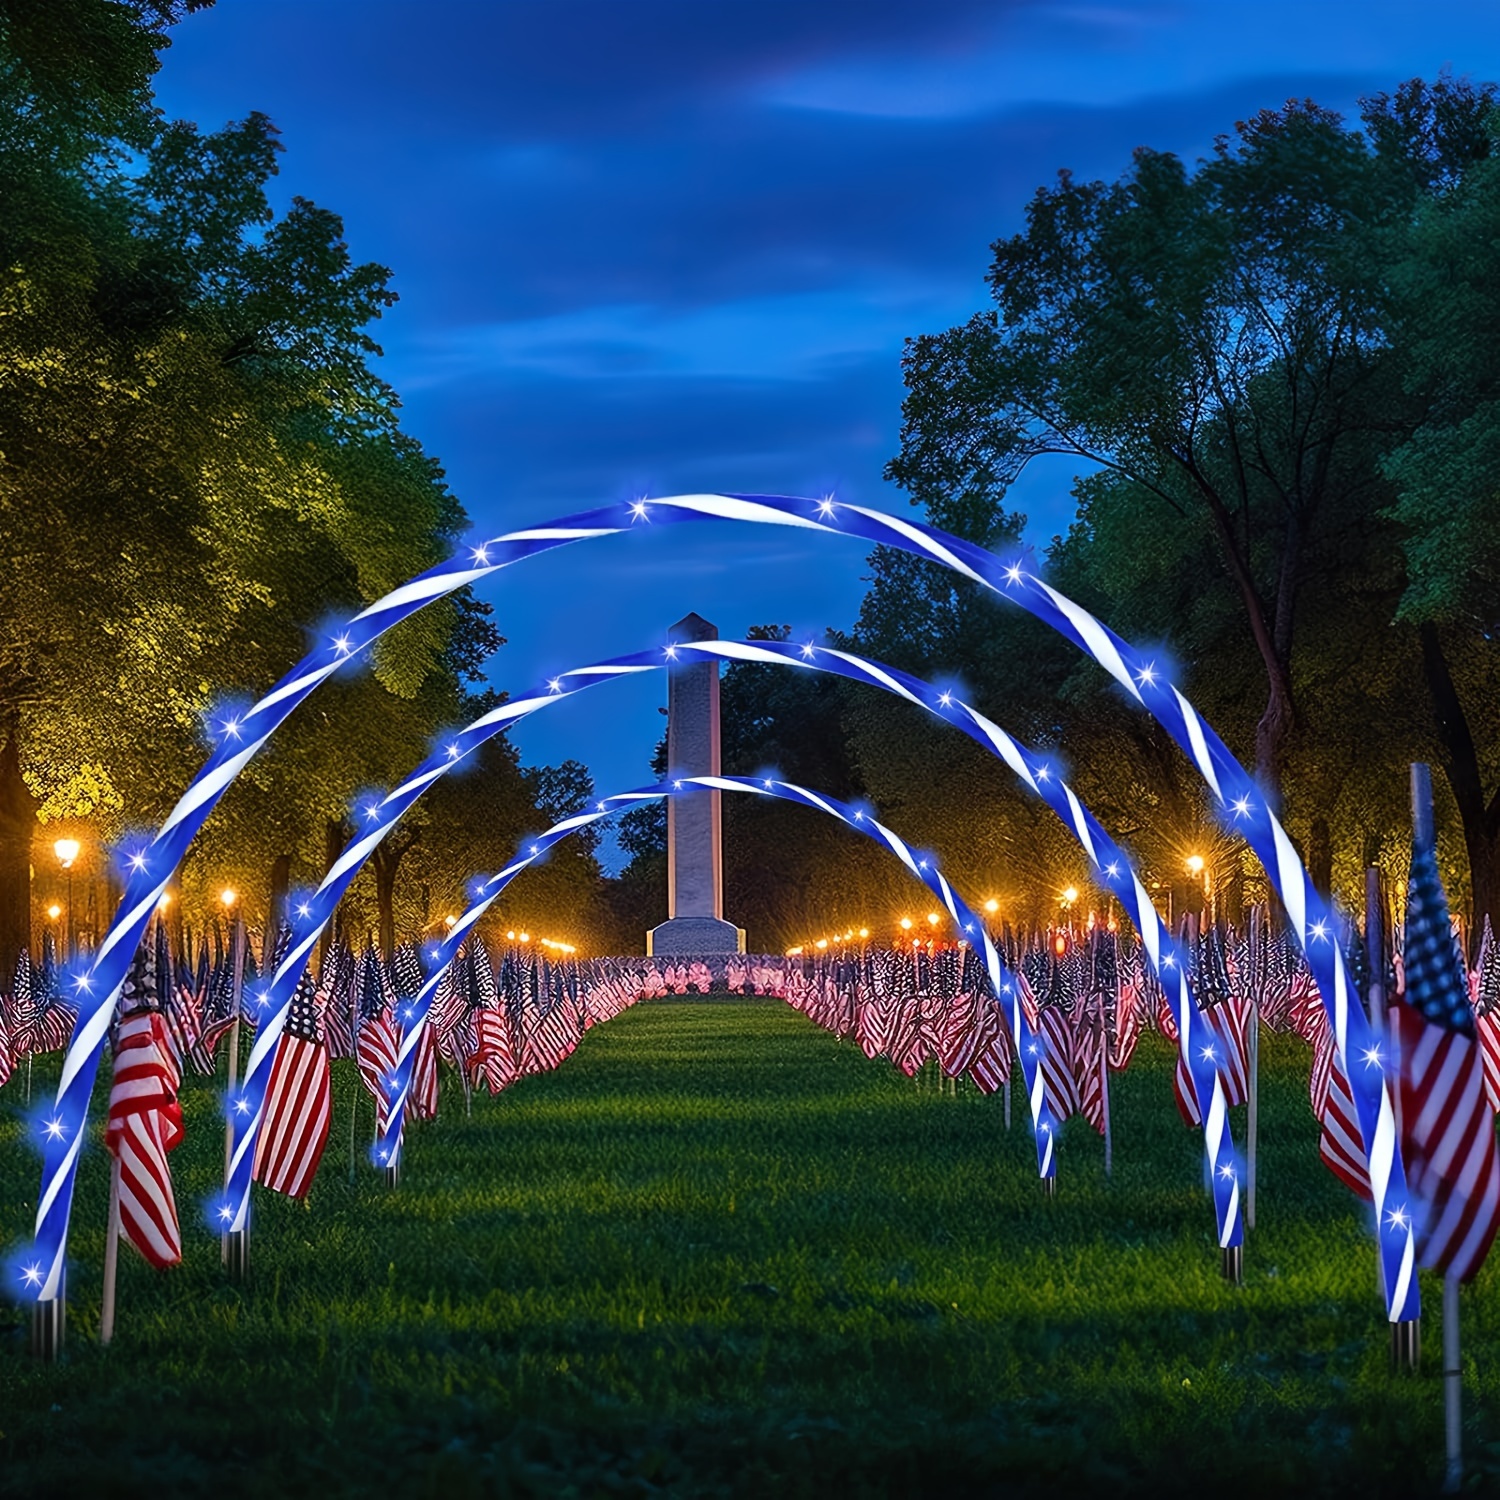 

3 Pcs 10ft Patriotic Light Arch Led 4th Of July Outdoor Archway Lights Decor Independence Day Red Blue And White Pathway Lights With Flasher Modes For Patriotic Memorial Day Party Decoration